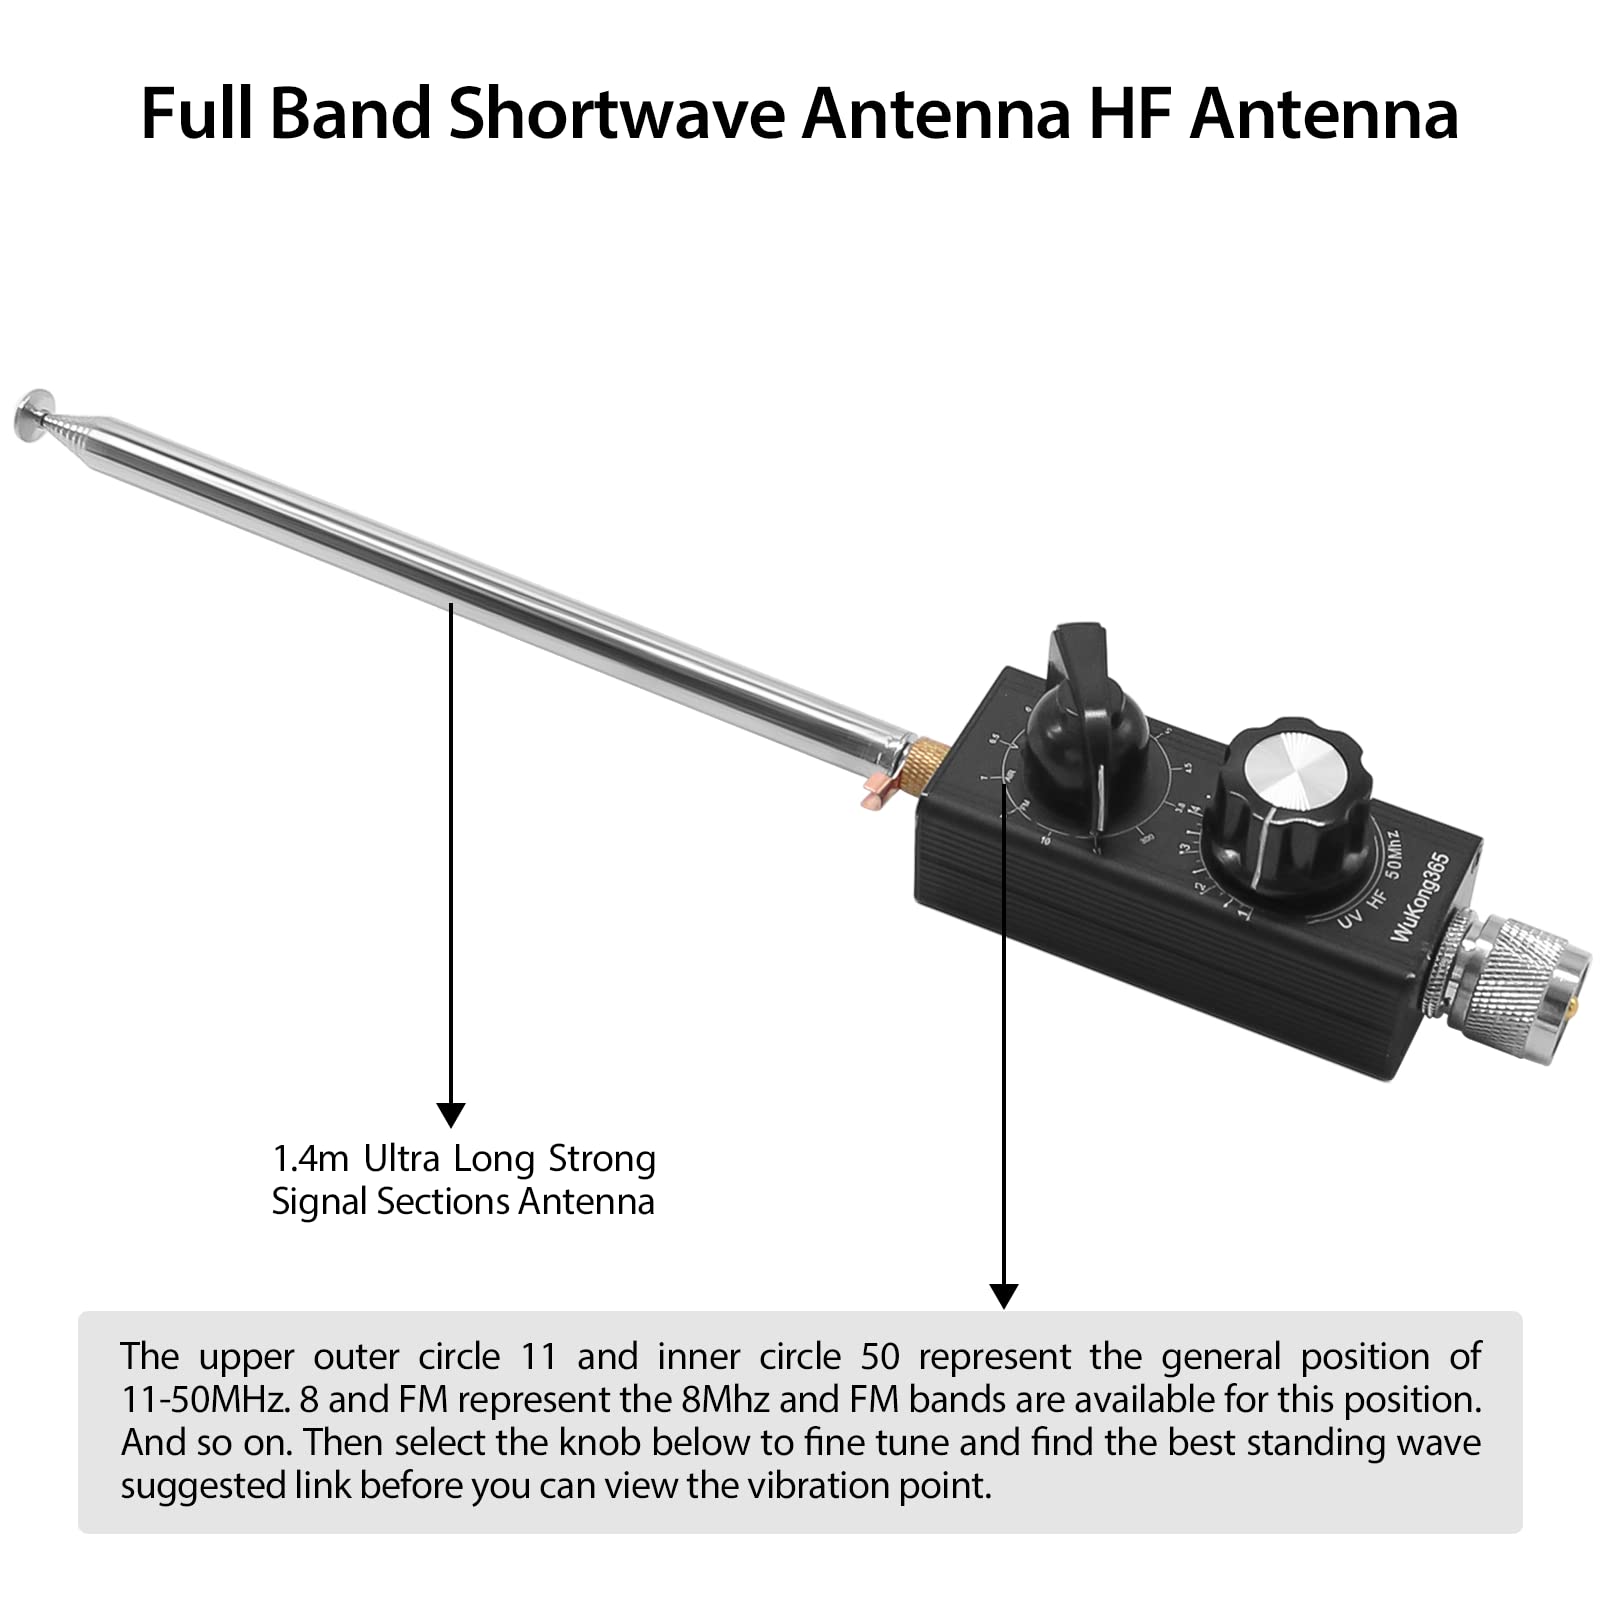 The Shortwave Radio Antenna -7/14/21/29MHZ expands your radio listening options to include shortwave frequencies, increasing the potential for accurate and long-distance communication. With a wider range of frequencies, this antenna allows you to stay connected and informed even in remote locations.